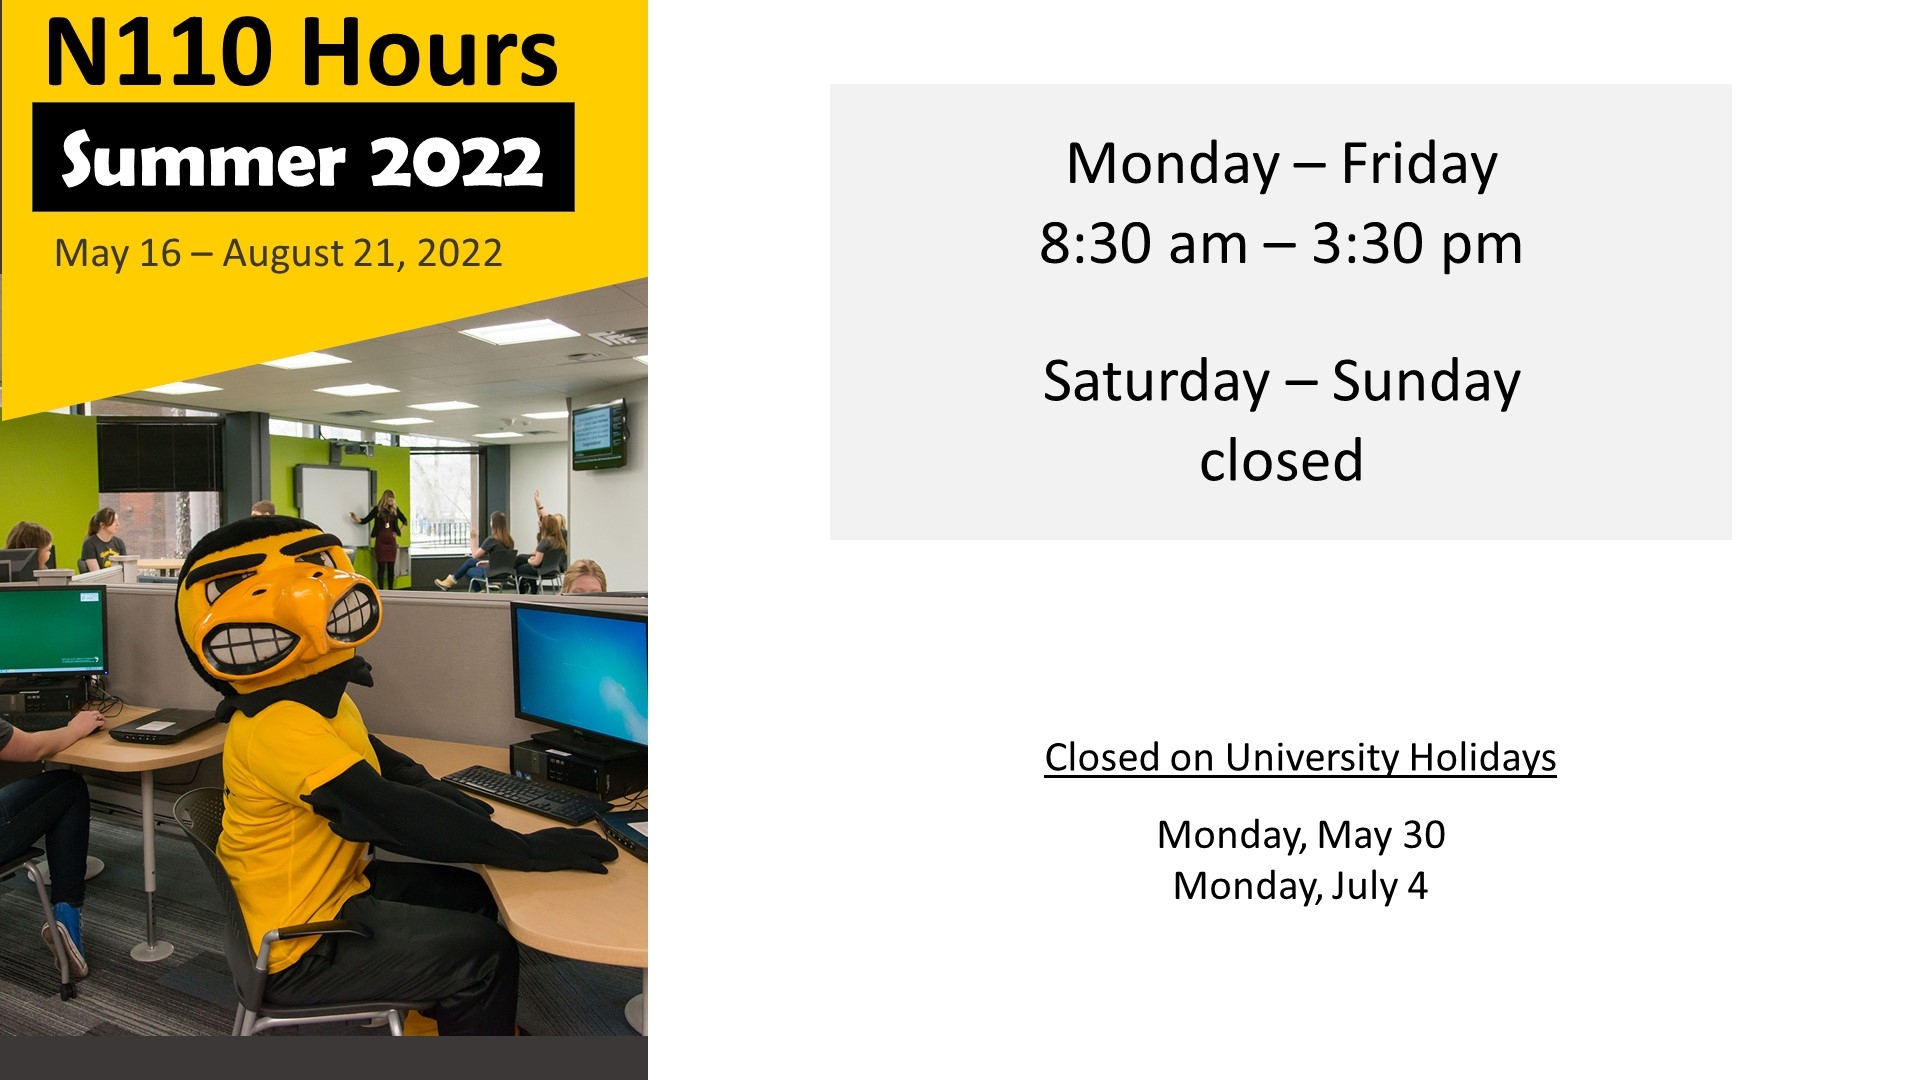 N110 summer hours. M-F 8:30a-3:30p. Closed weekends. Closed May 30 and July 4.